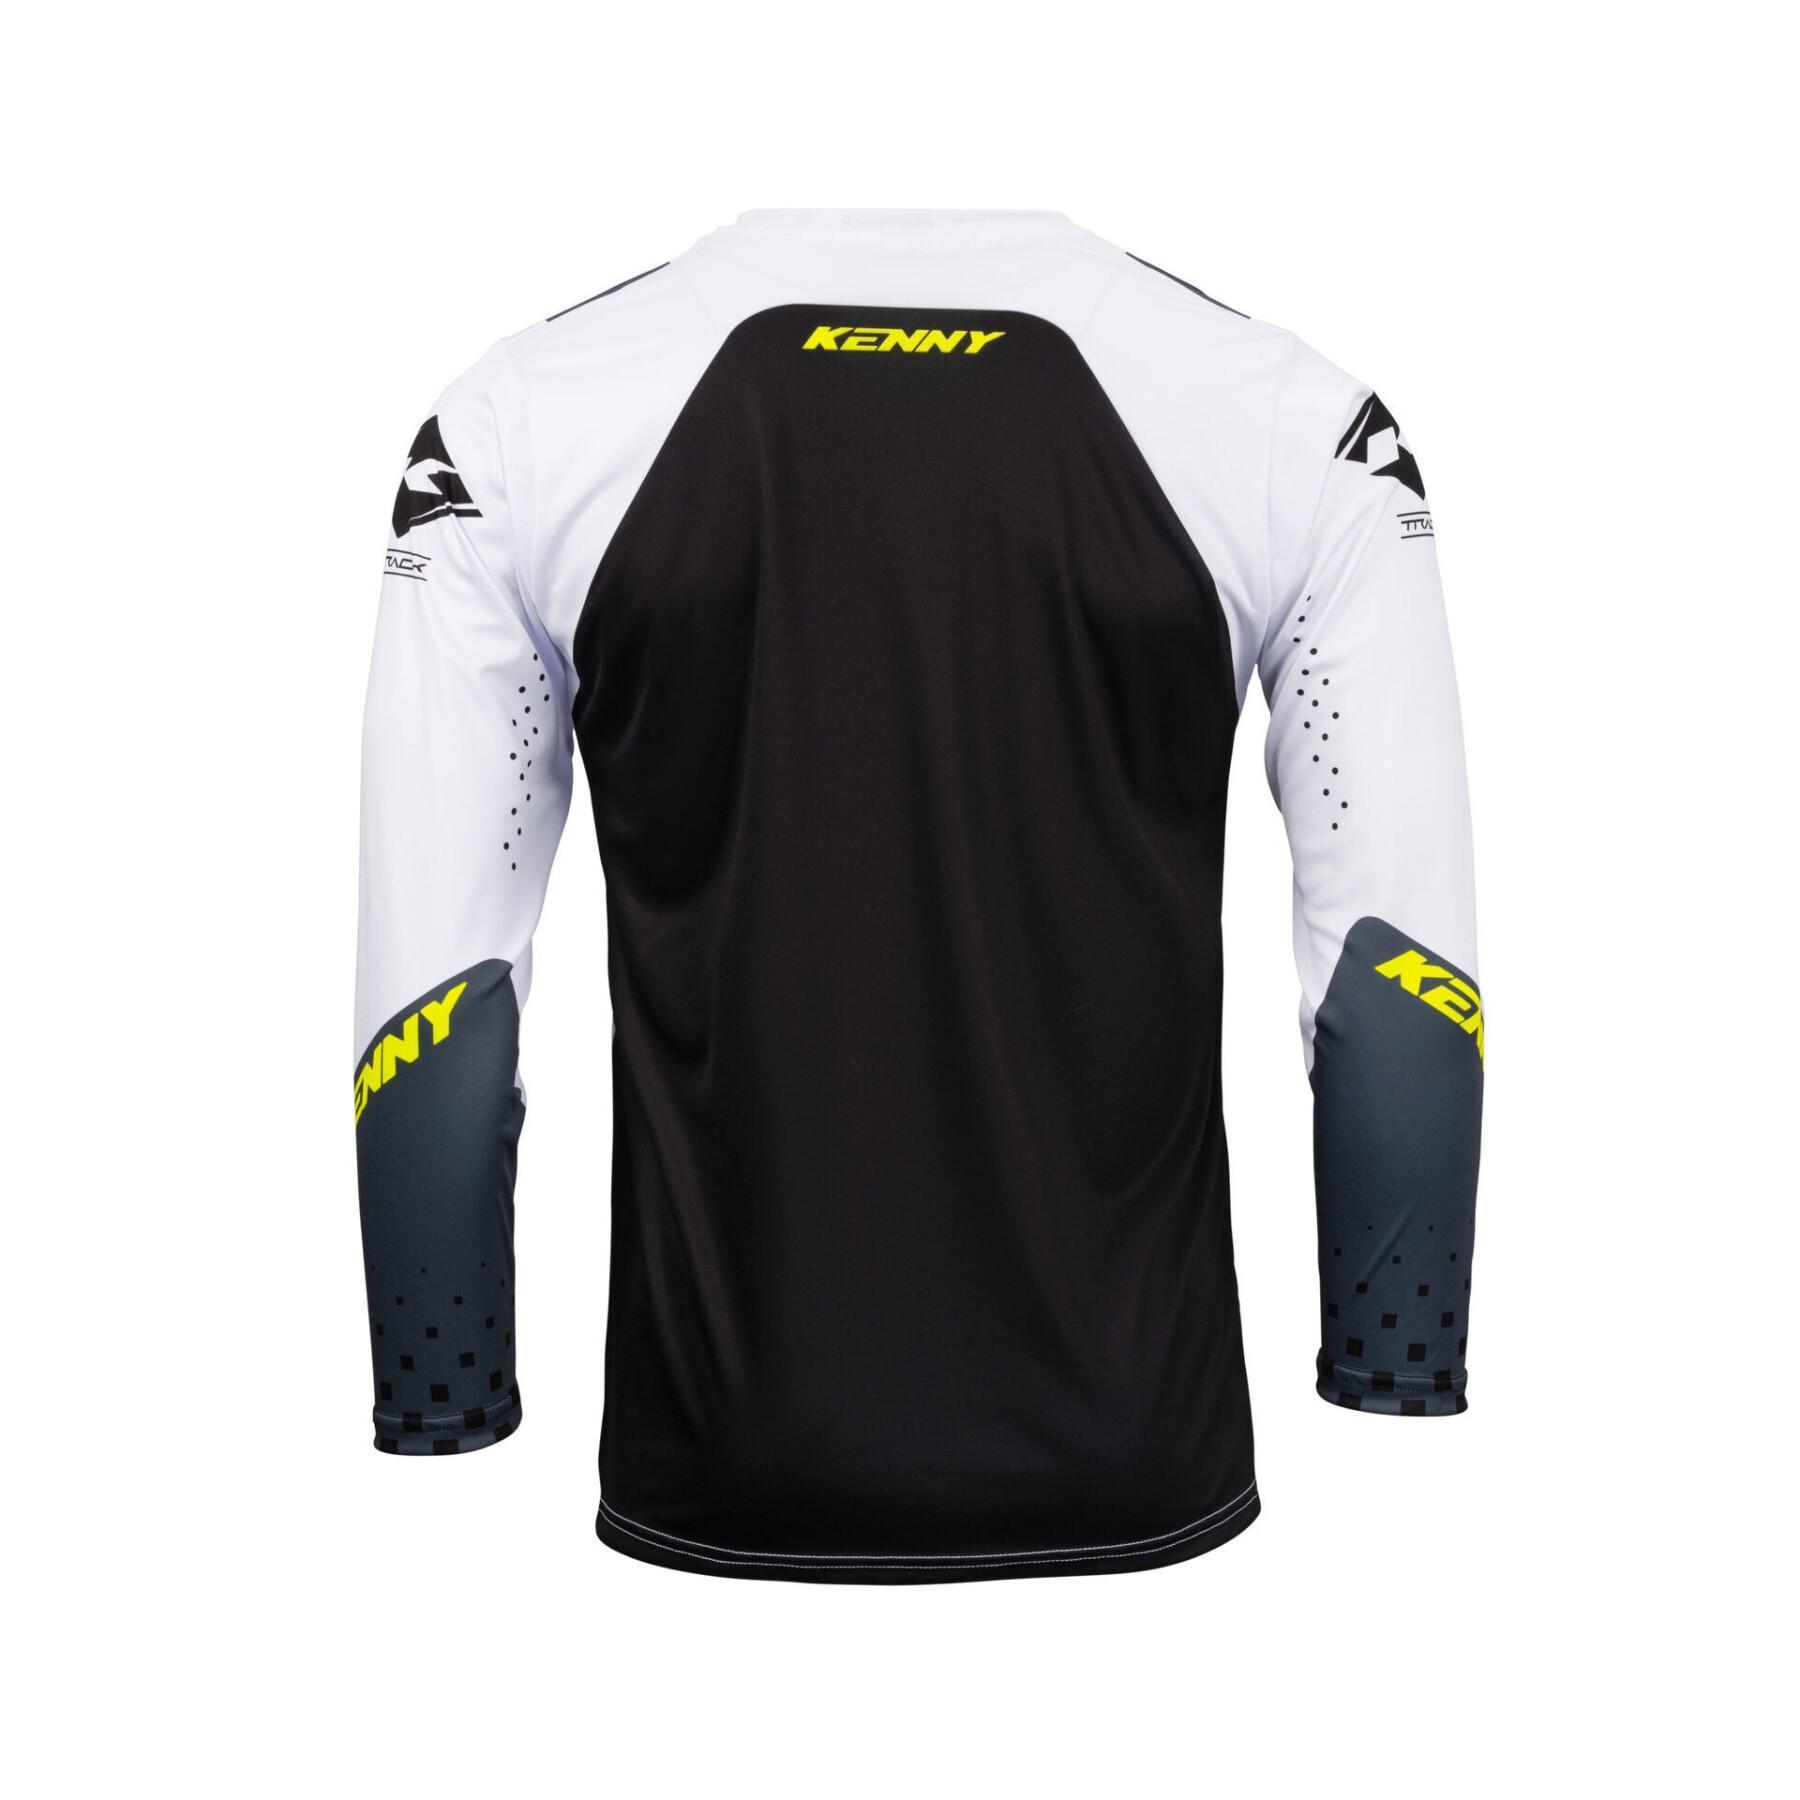 Motorcycle cross jersey Kenny Track Focus